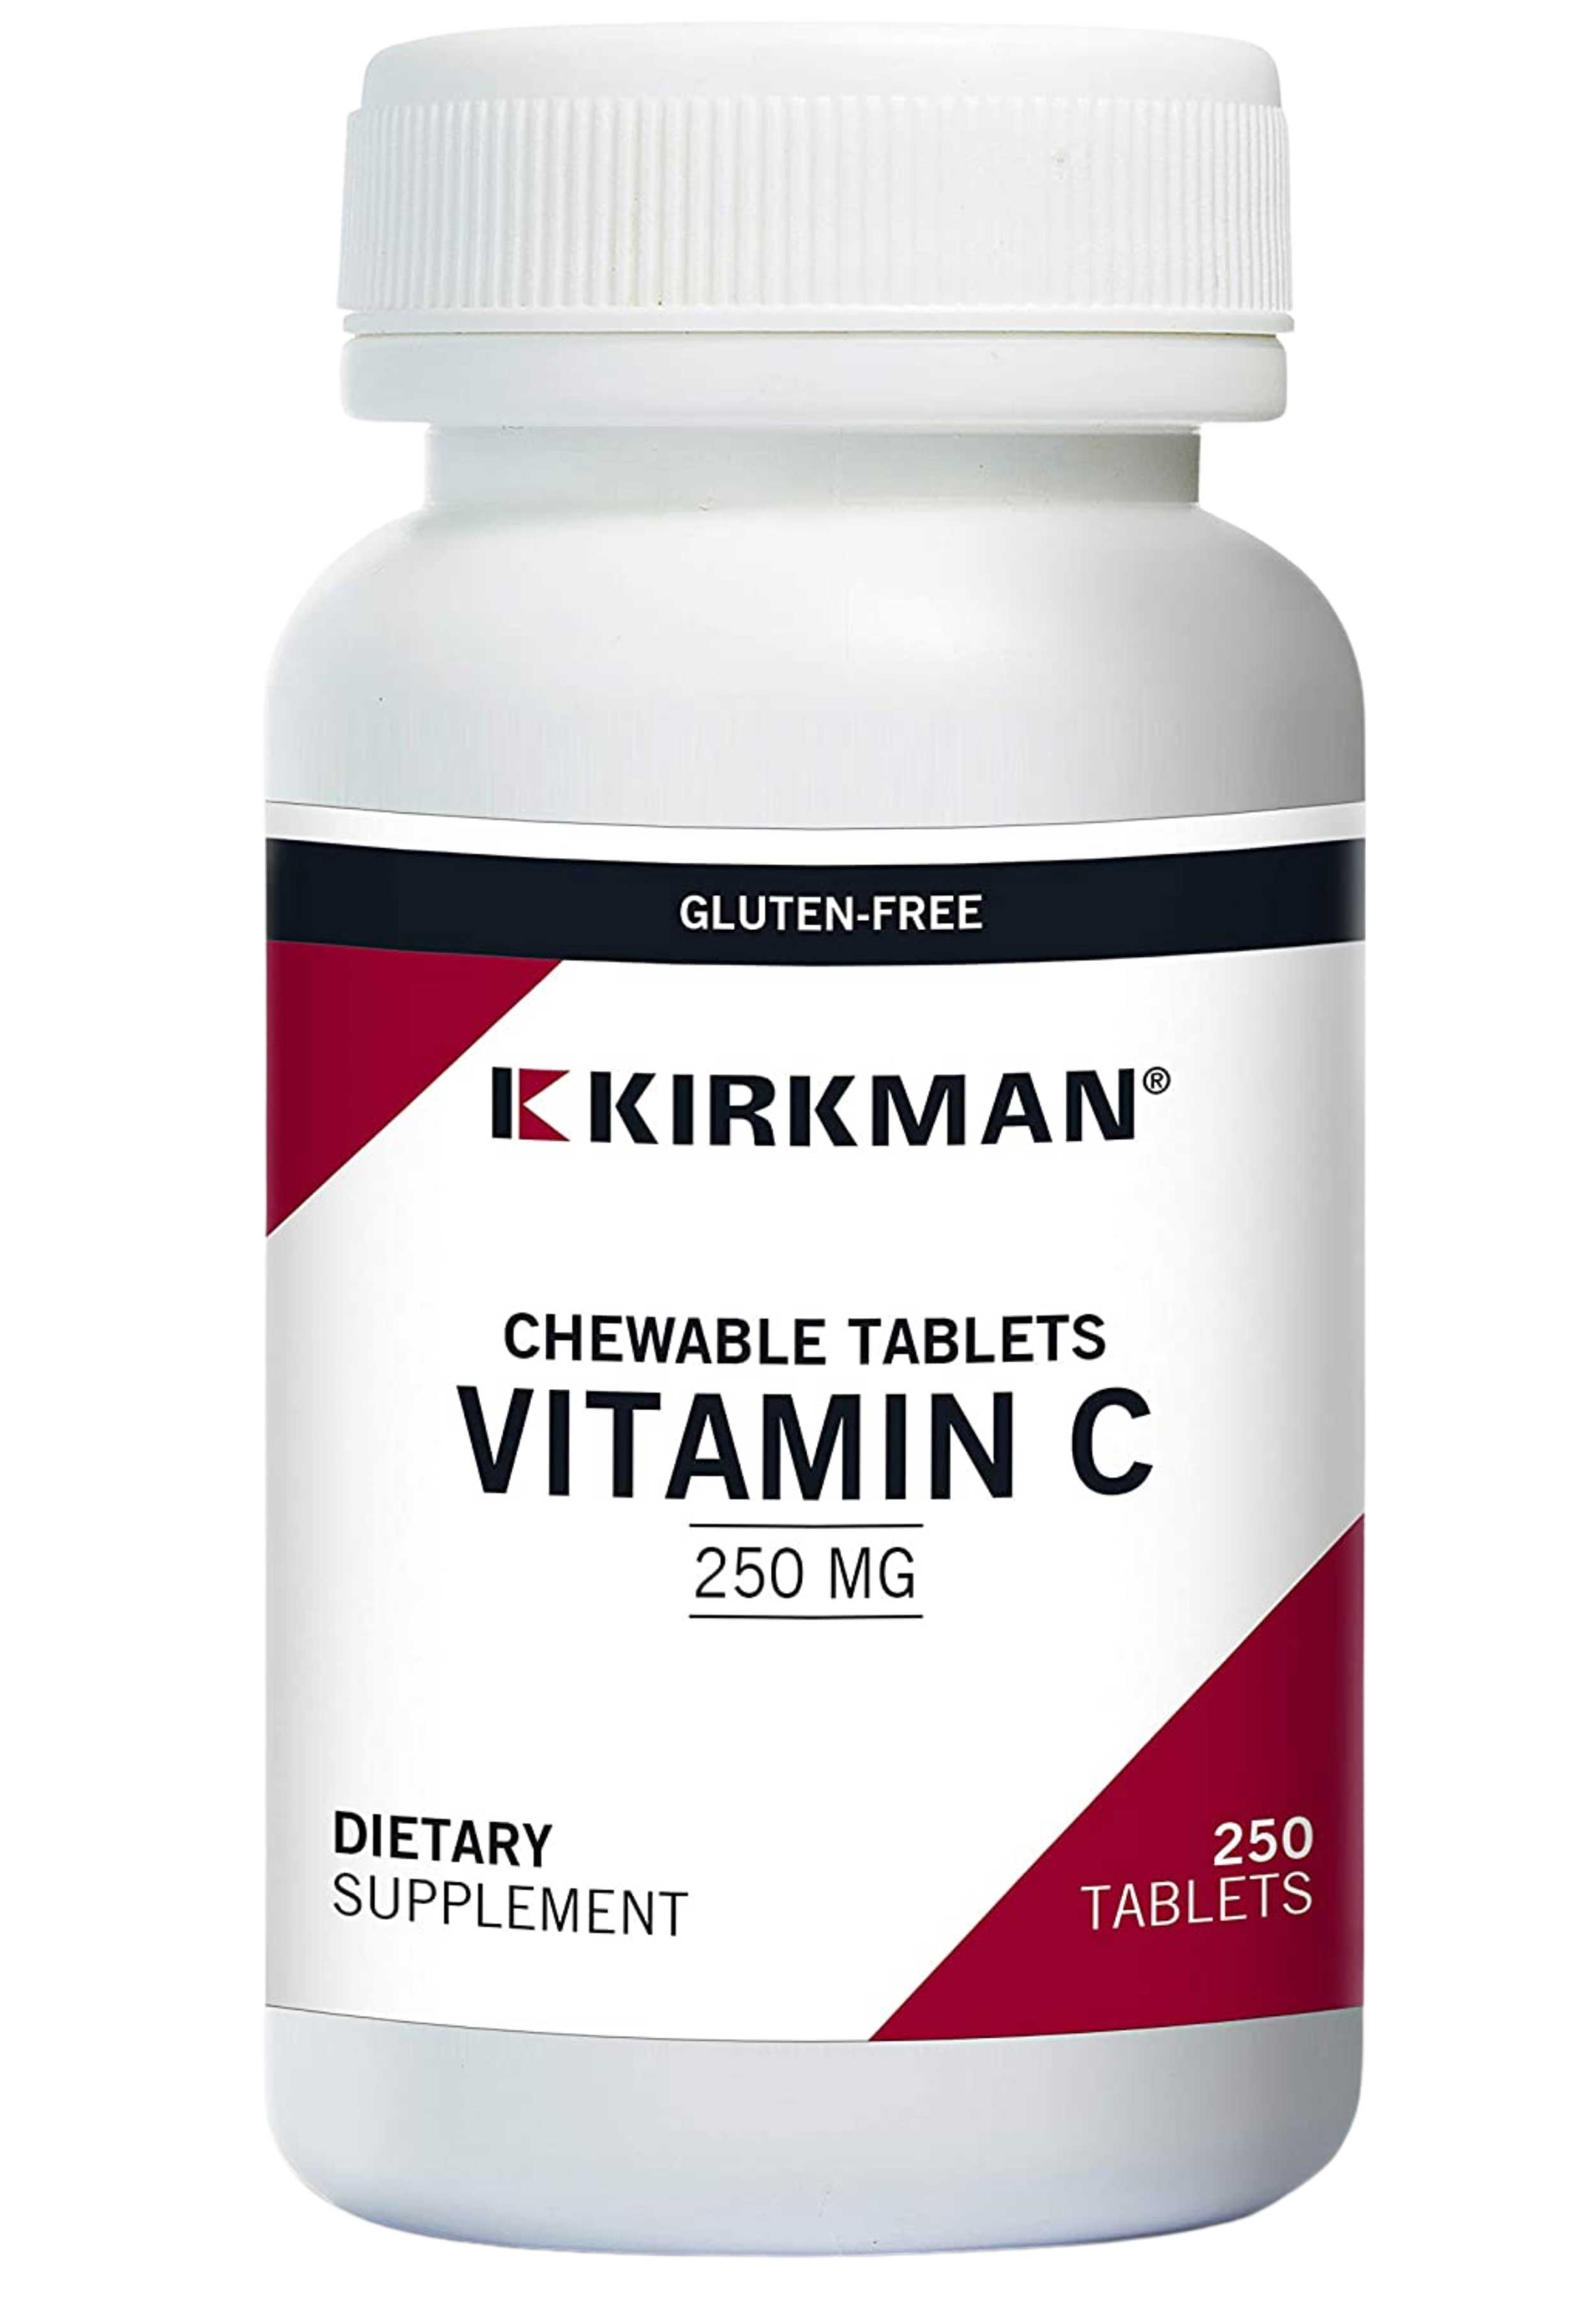 Kirkman Chewable Tablets Vitamin C 250 mg (Formerly Vitamin C 250 mg Chewable Tablets with Stevia)